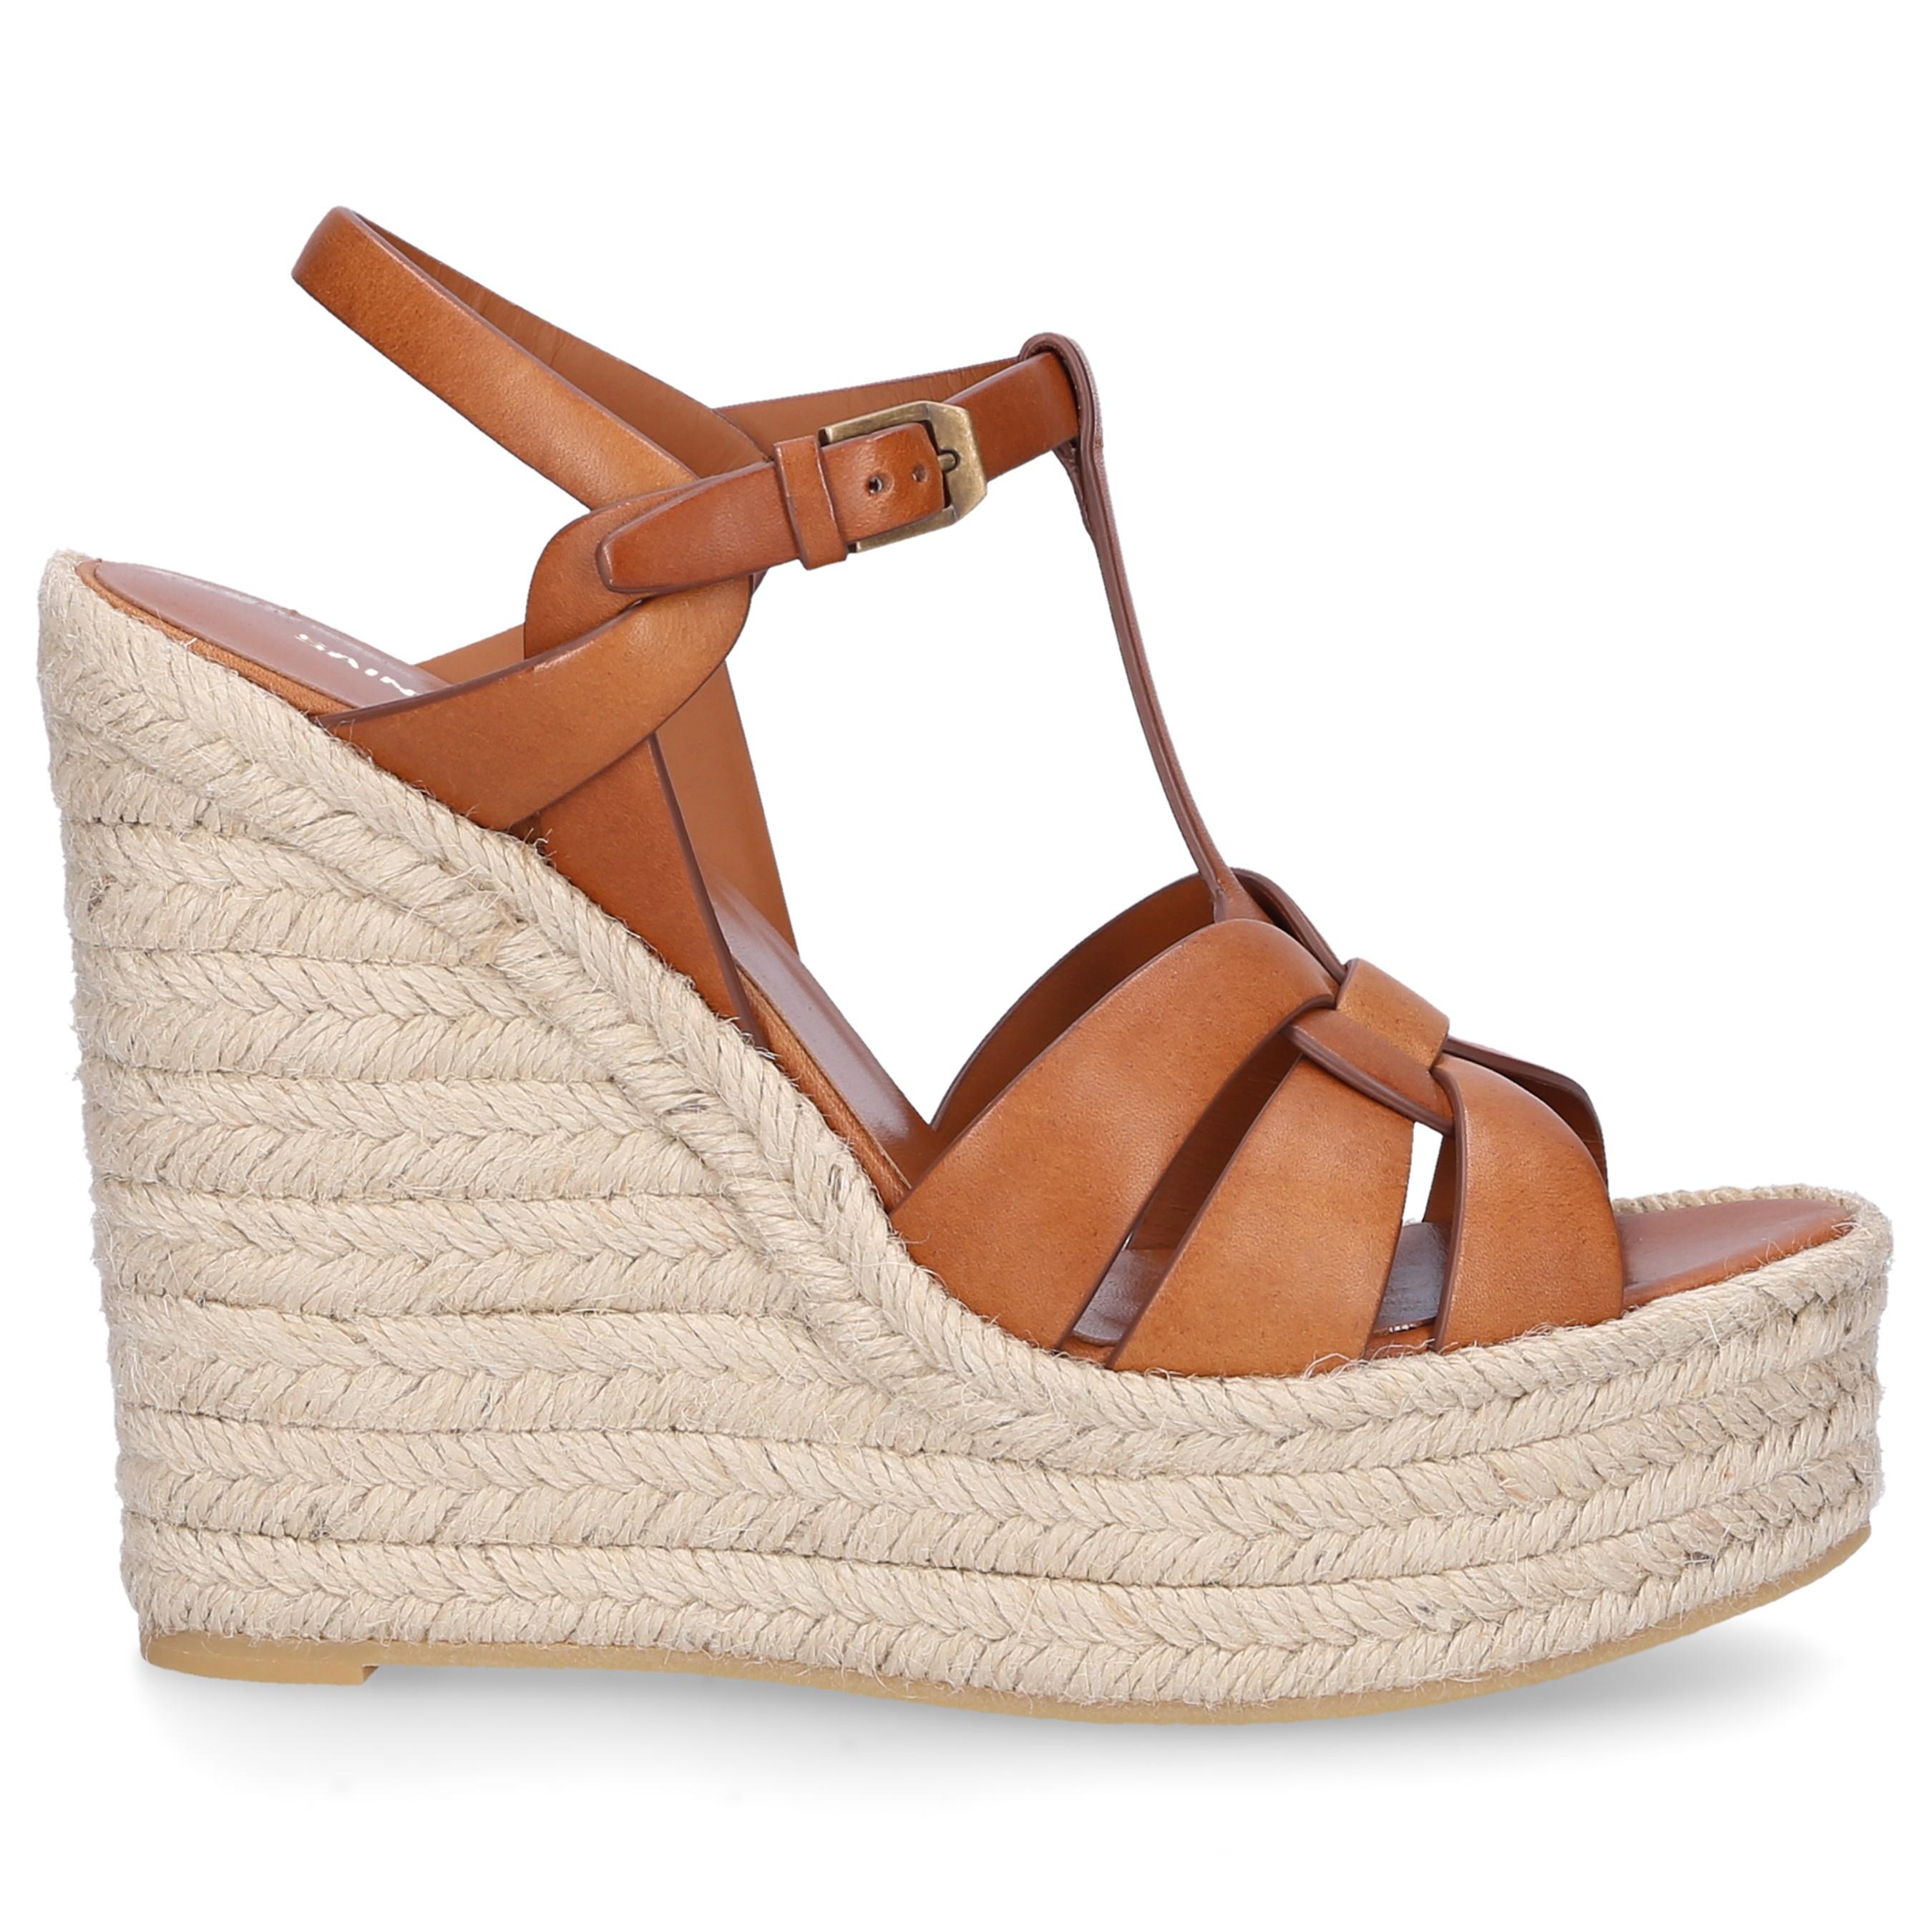 Saint Laurent Tribute Leather Espadrille Wedge Sandals in Brown - Save ...